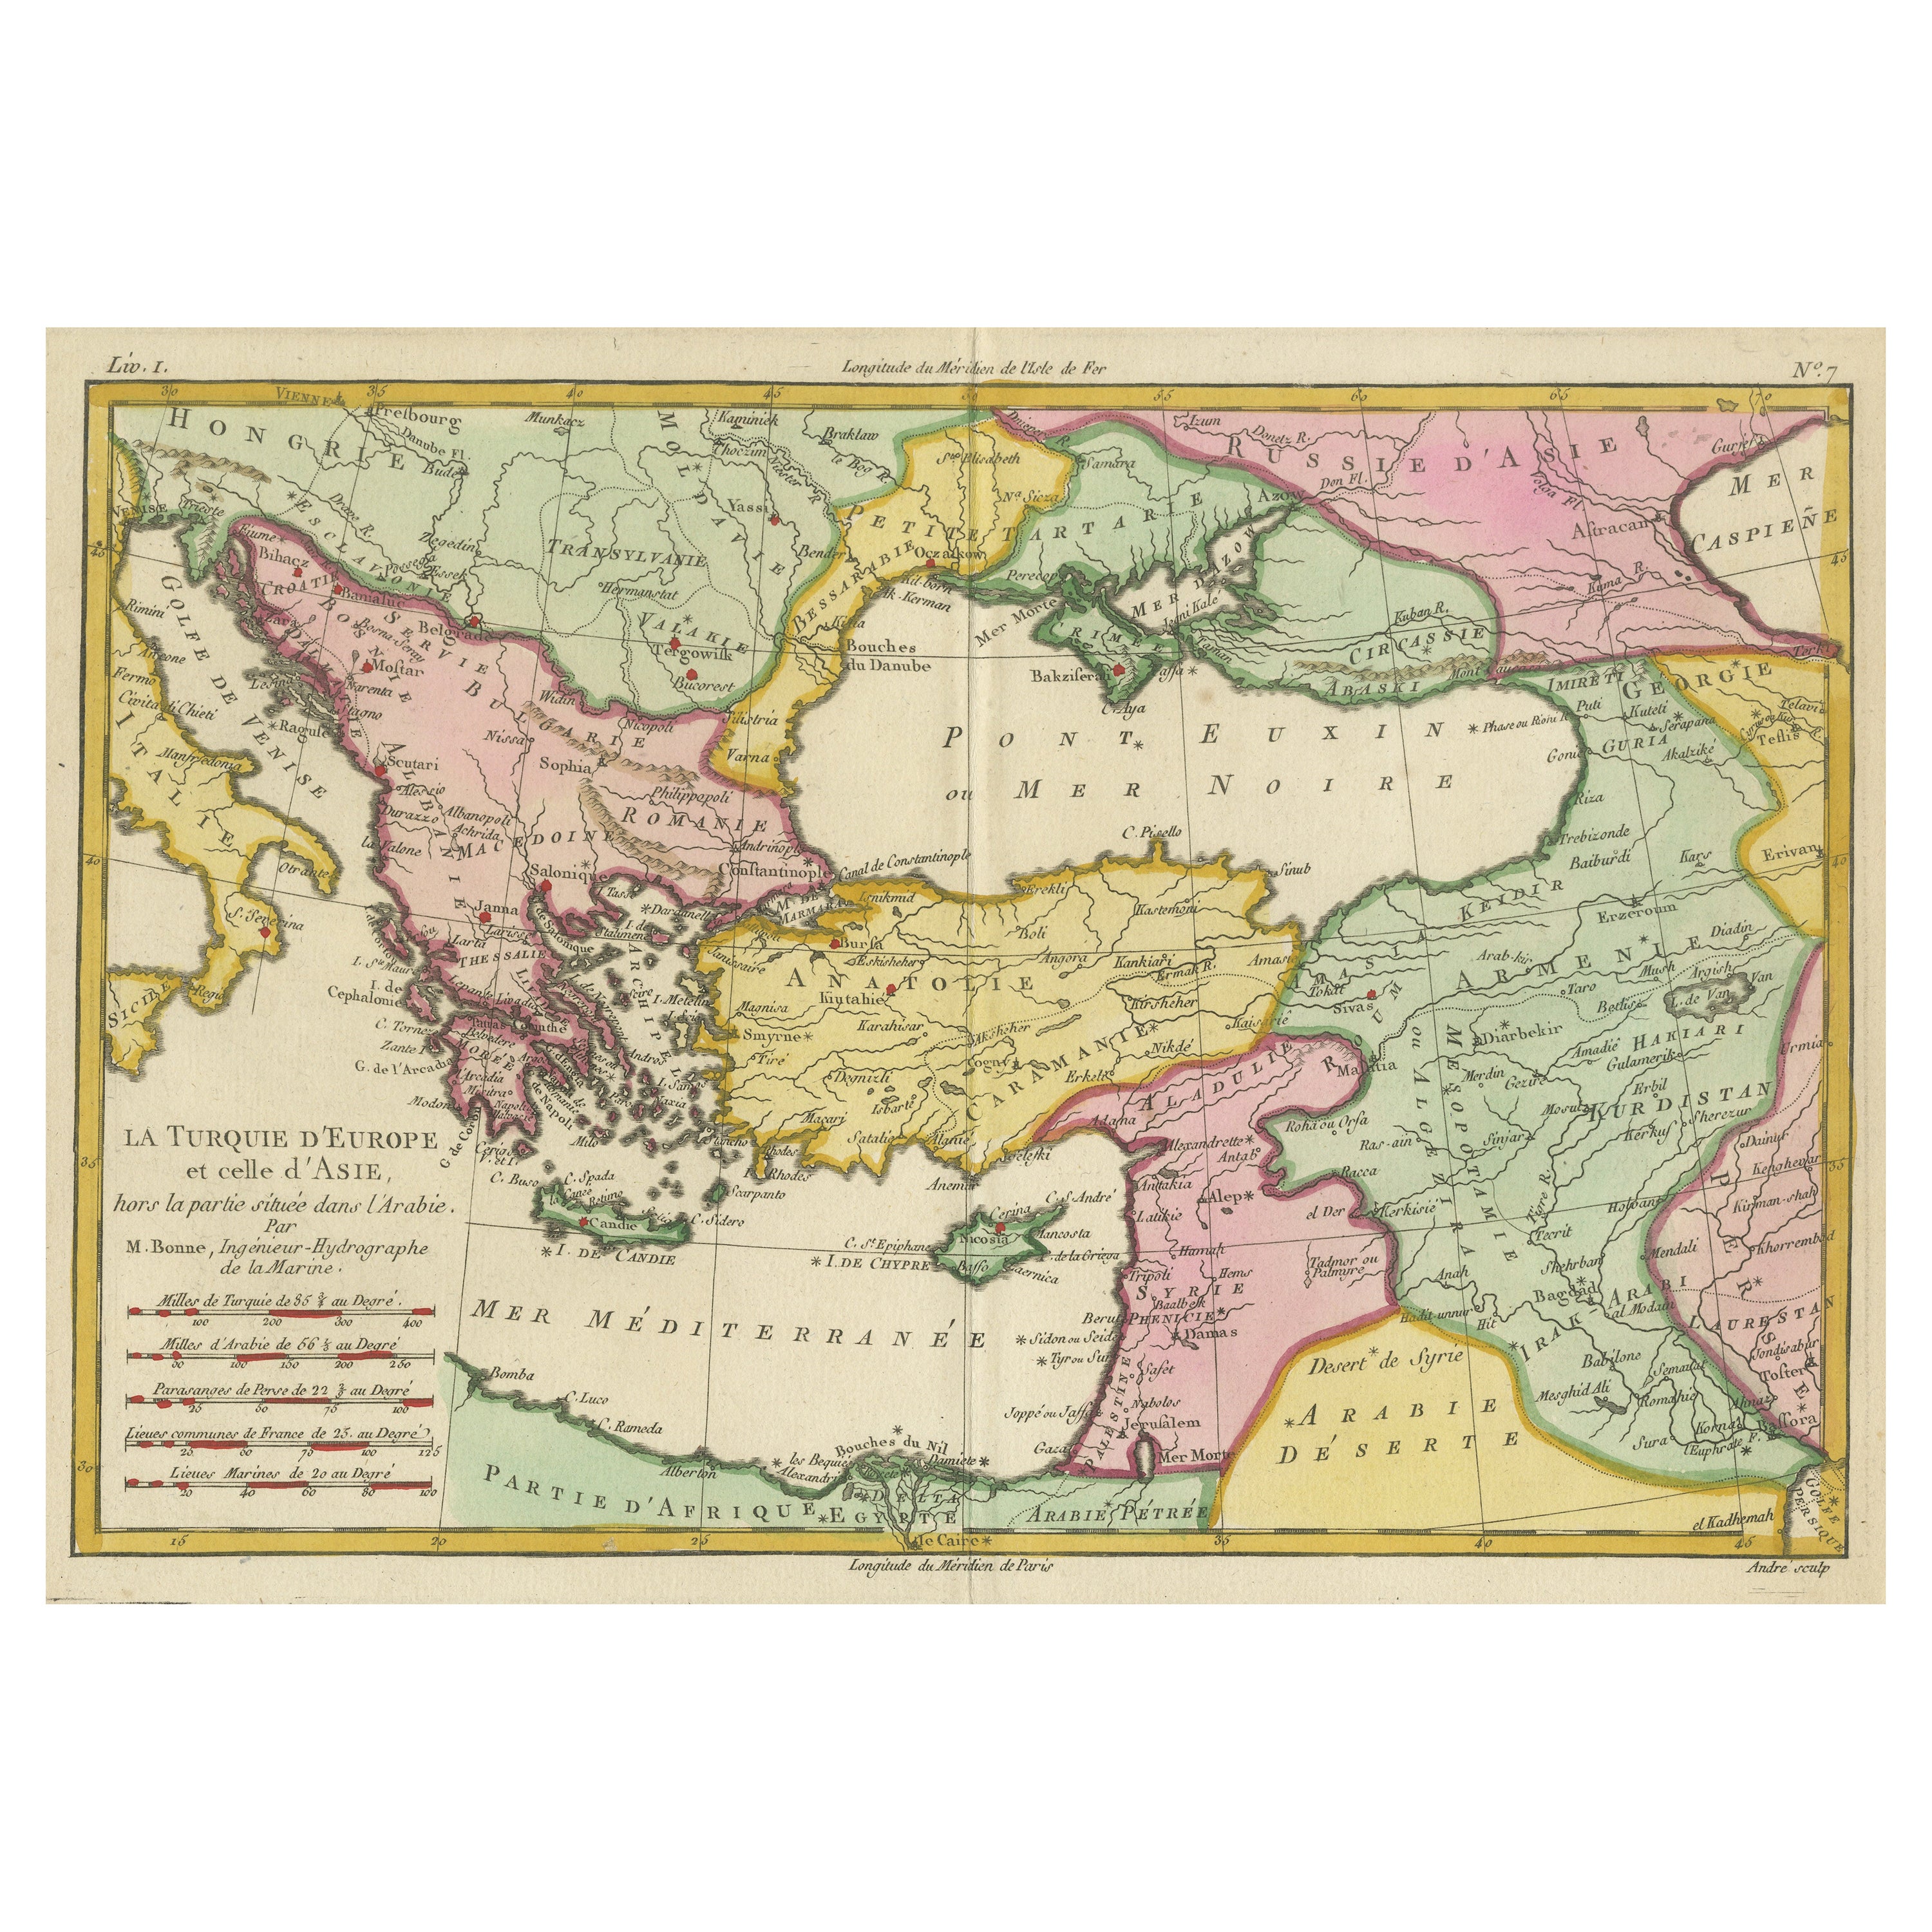 Antique Map of the Eastern Mediterranean and the Balkans